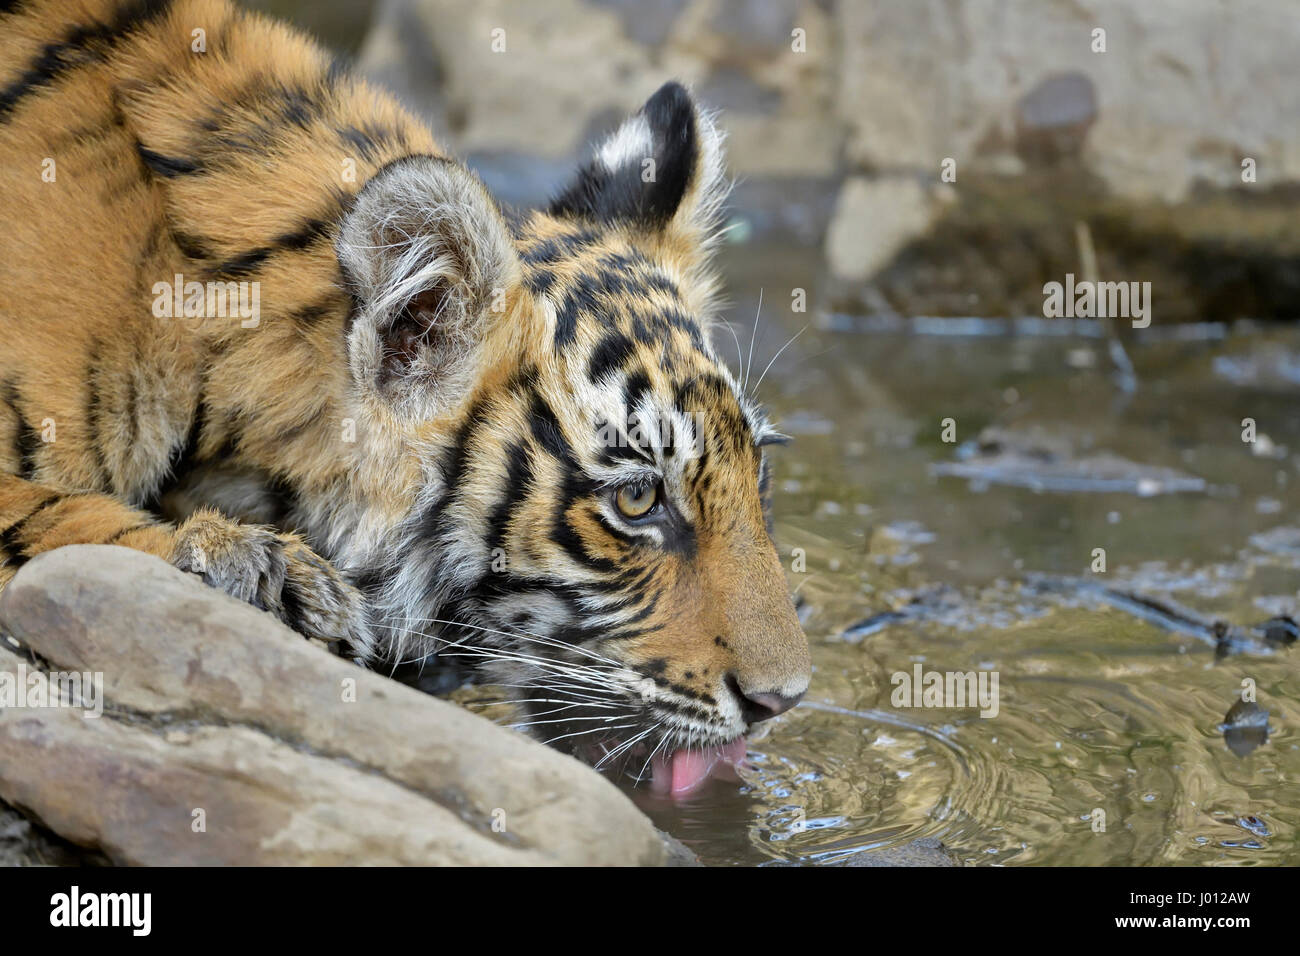 Wild tiger cub drinking water from a small pond in Ranthambhore national park of India Stock Photo